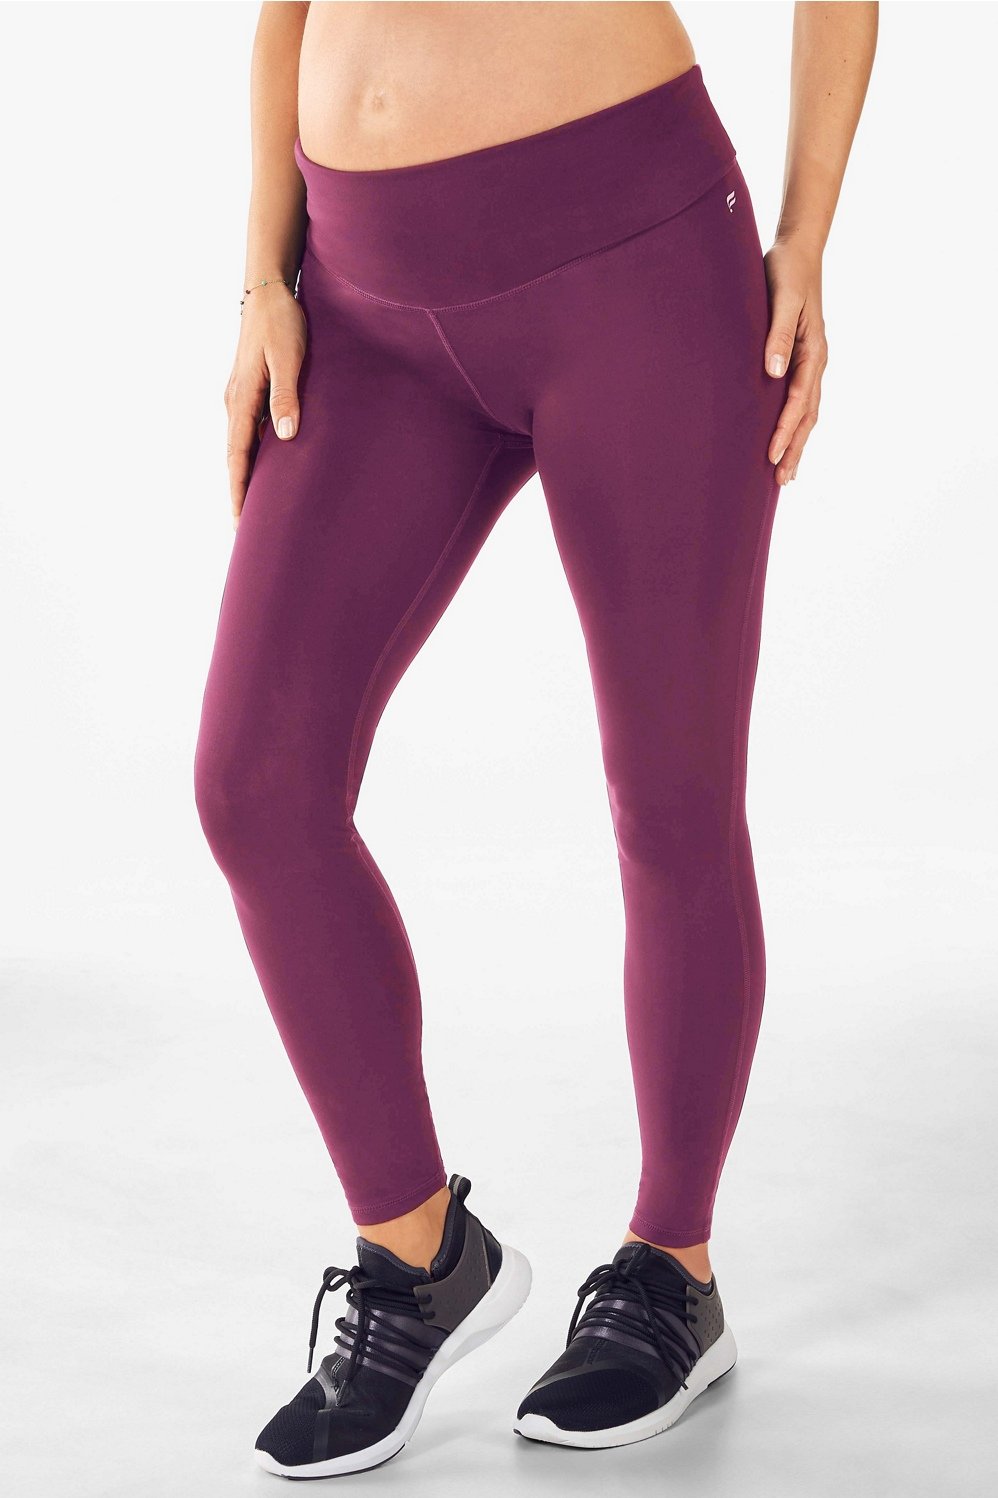 PureLuxe High-Waisted Maternity Legging - Fabletics